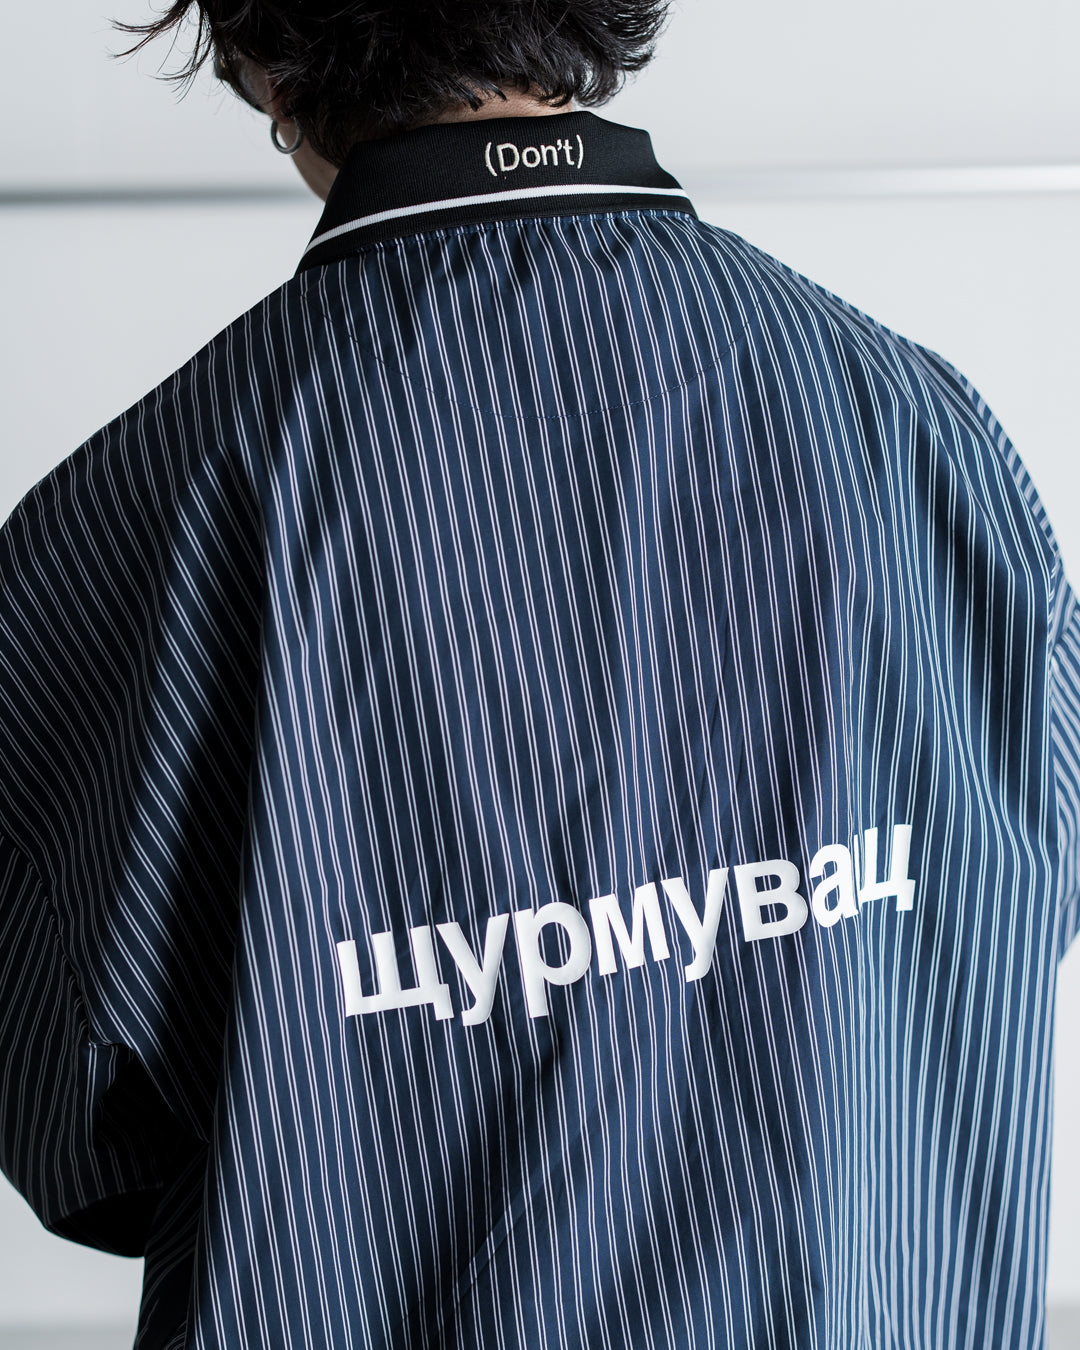 UNTRACE STRIPE FOOTBALL GAME SHIRT L/S